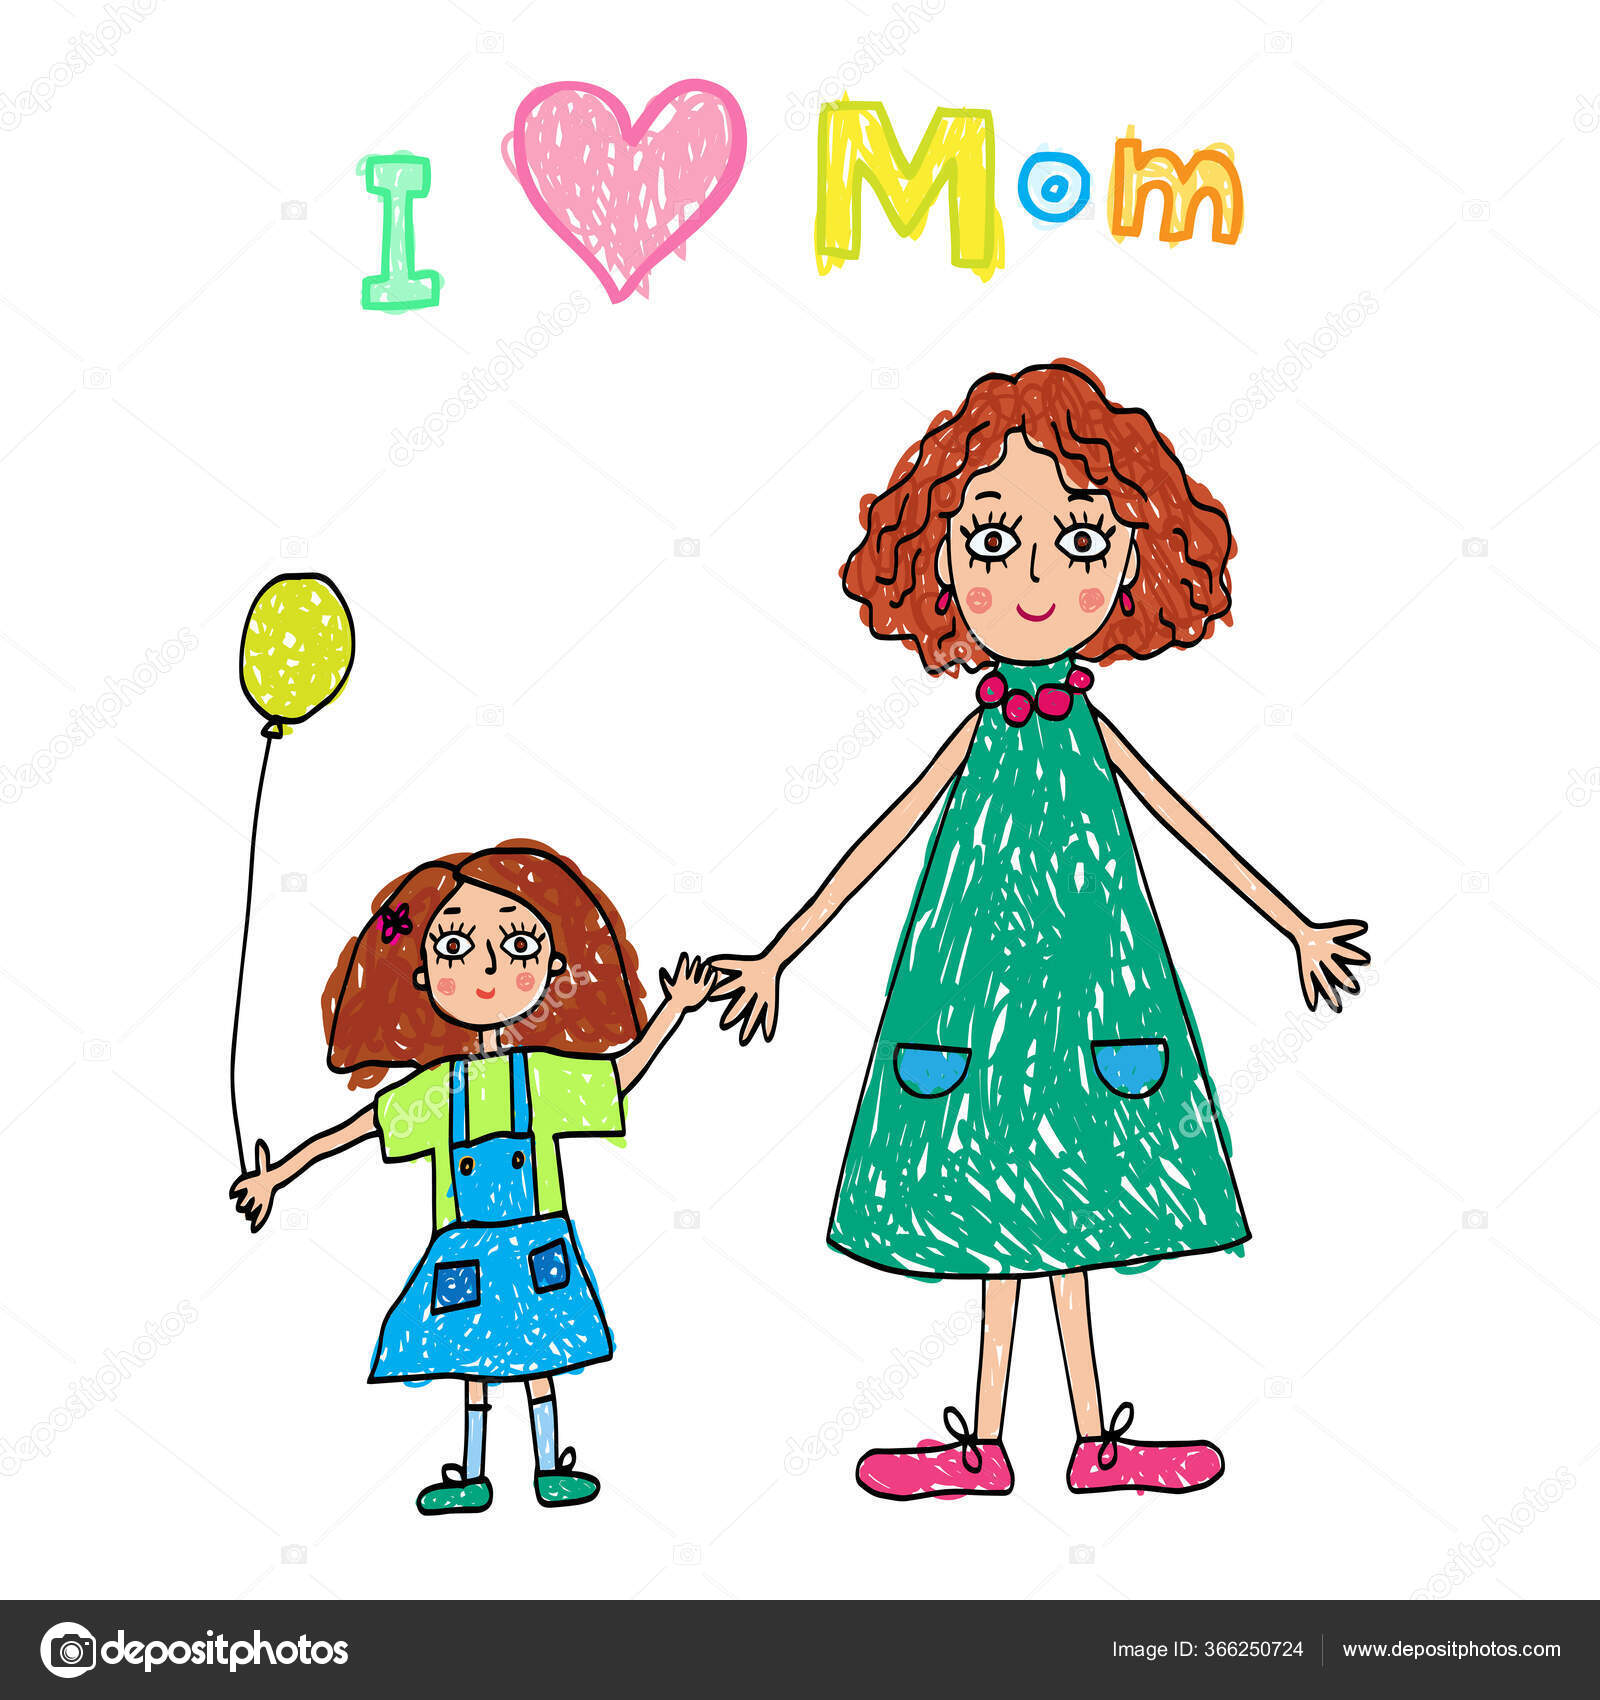 View Mother's Day drawings from Eastern Connecticut students-saigonsouth.com.vn